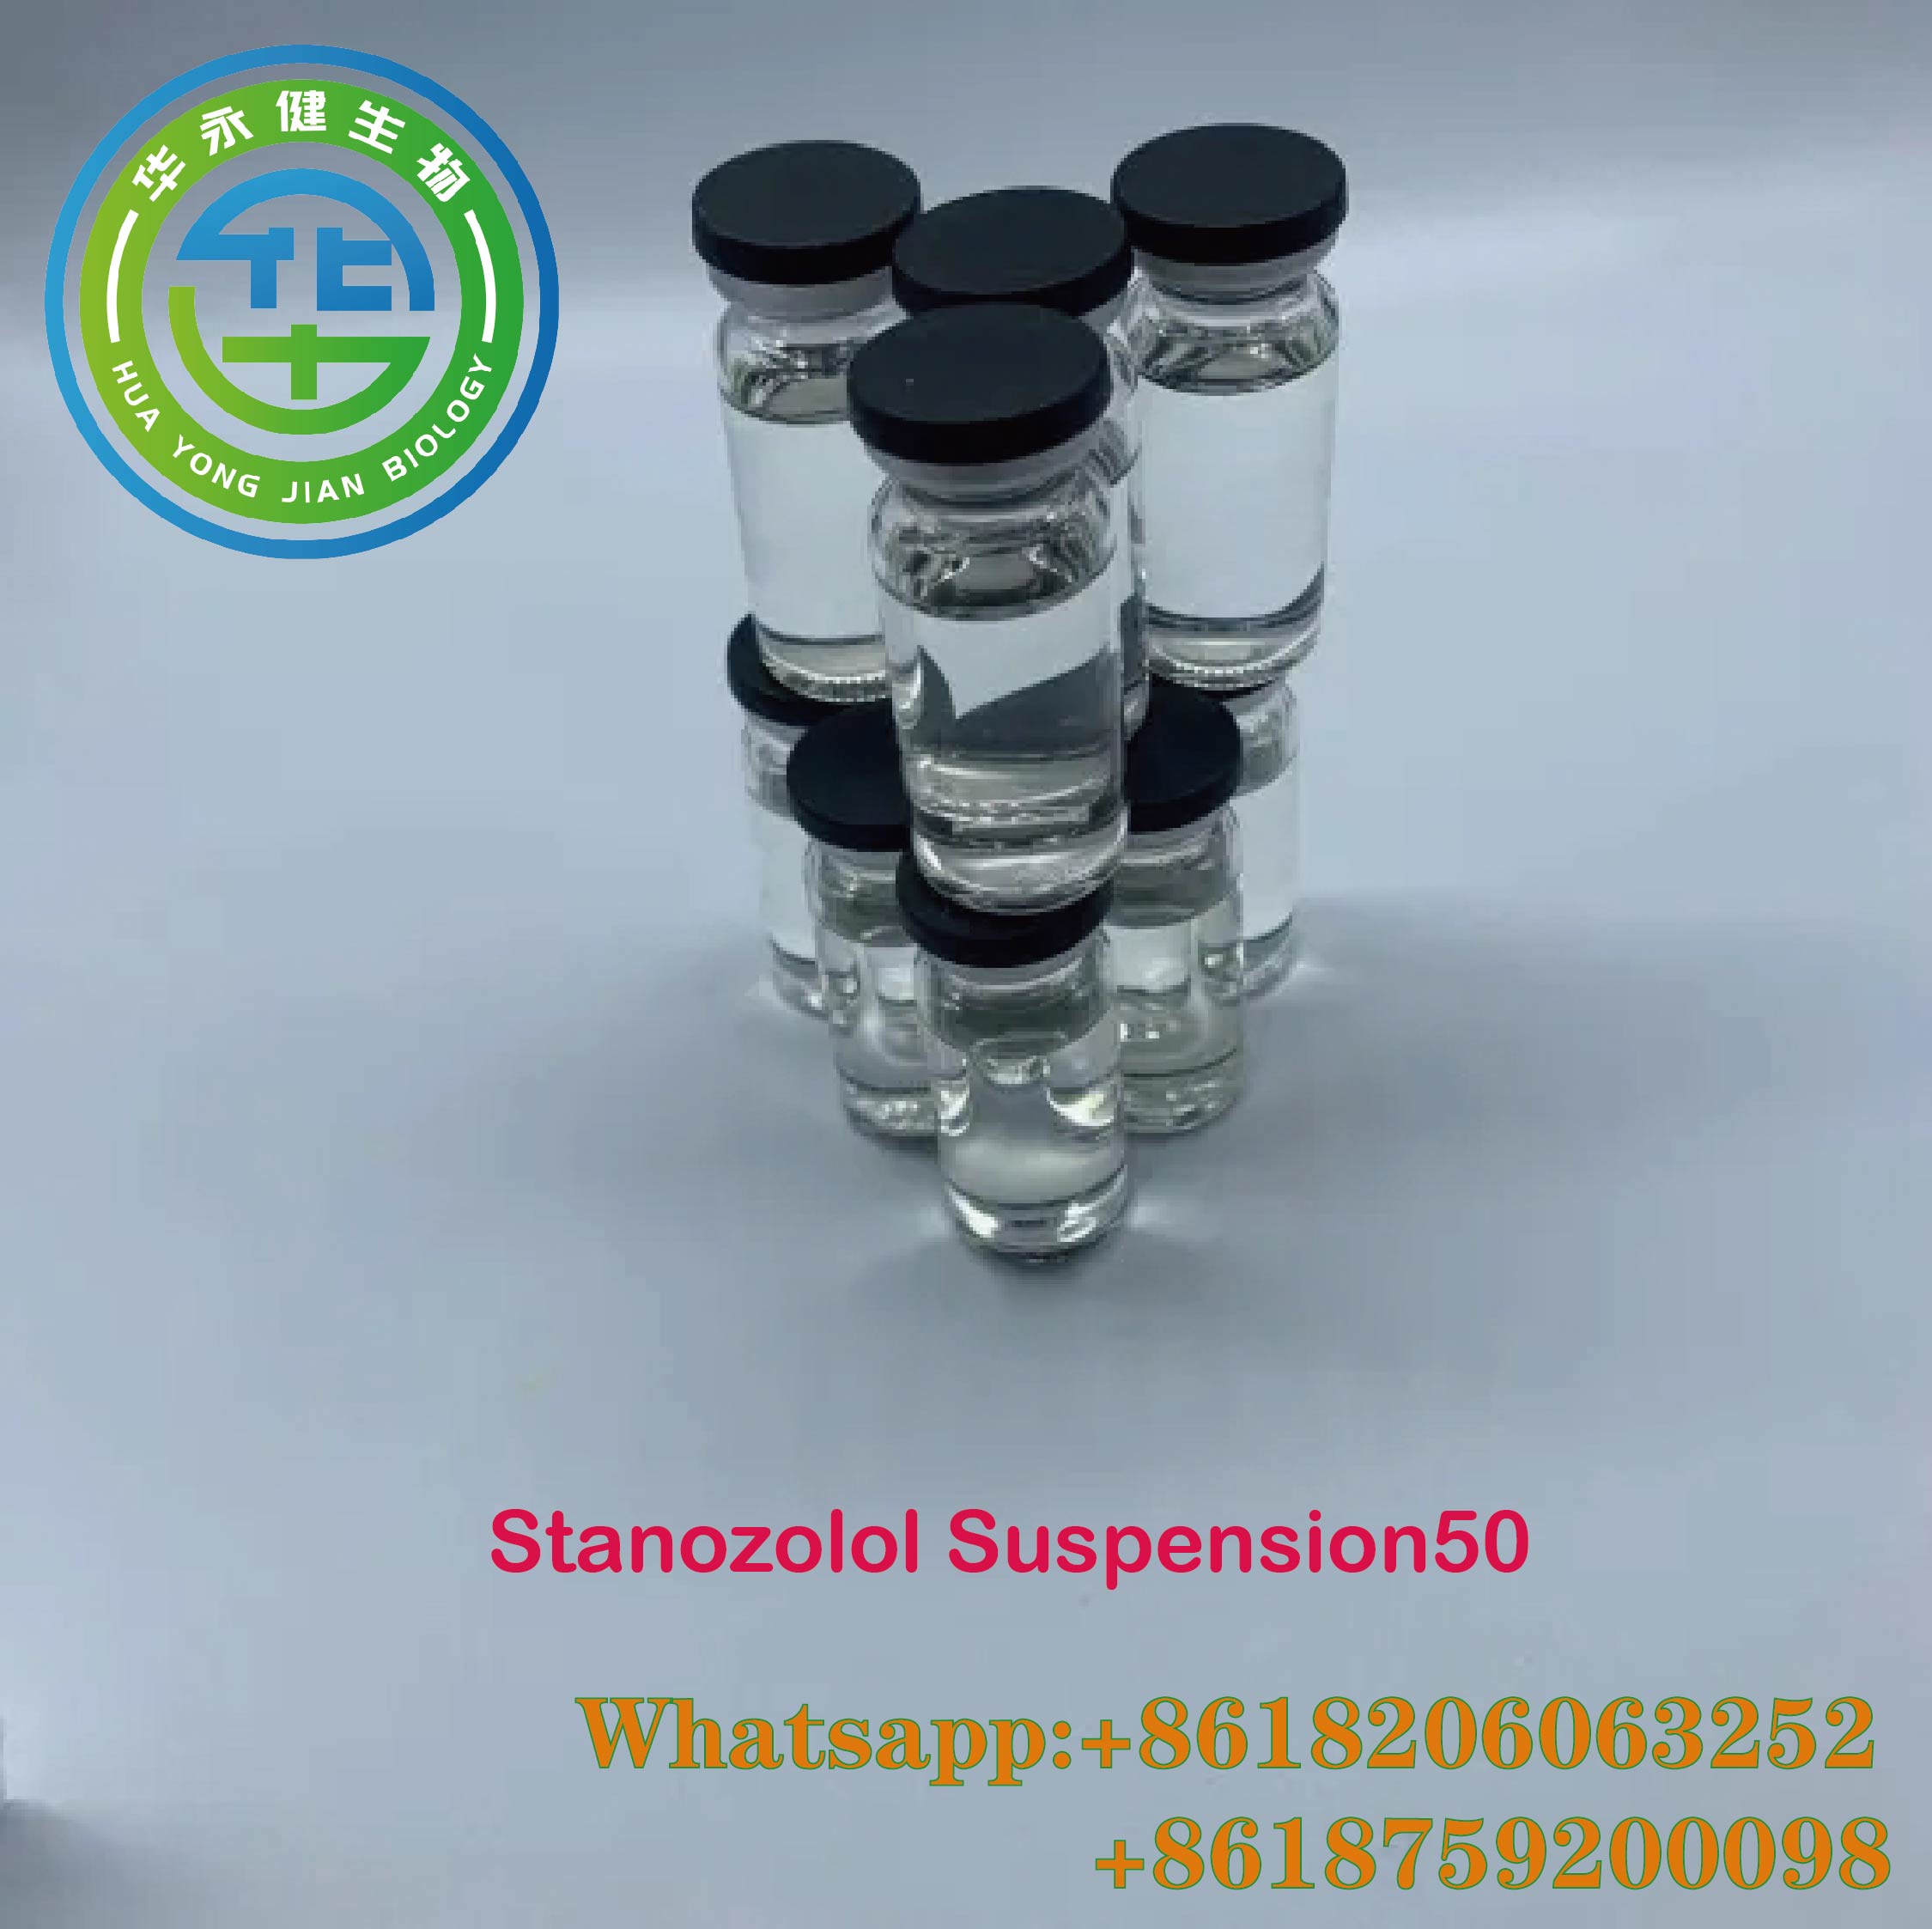 Gain Muscle 10ml Stanozolol Suspension50 Finished Bodybuilding Oil with Mct Carrier 50mg/ml Oil